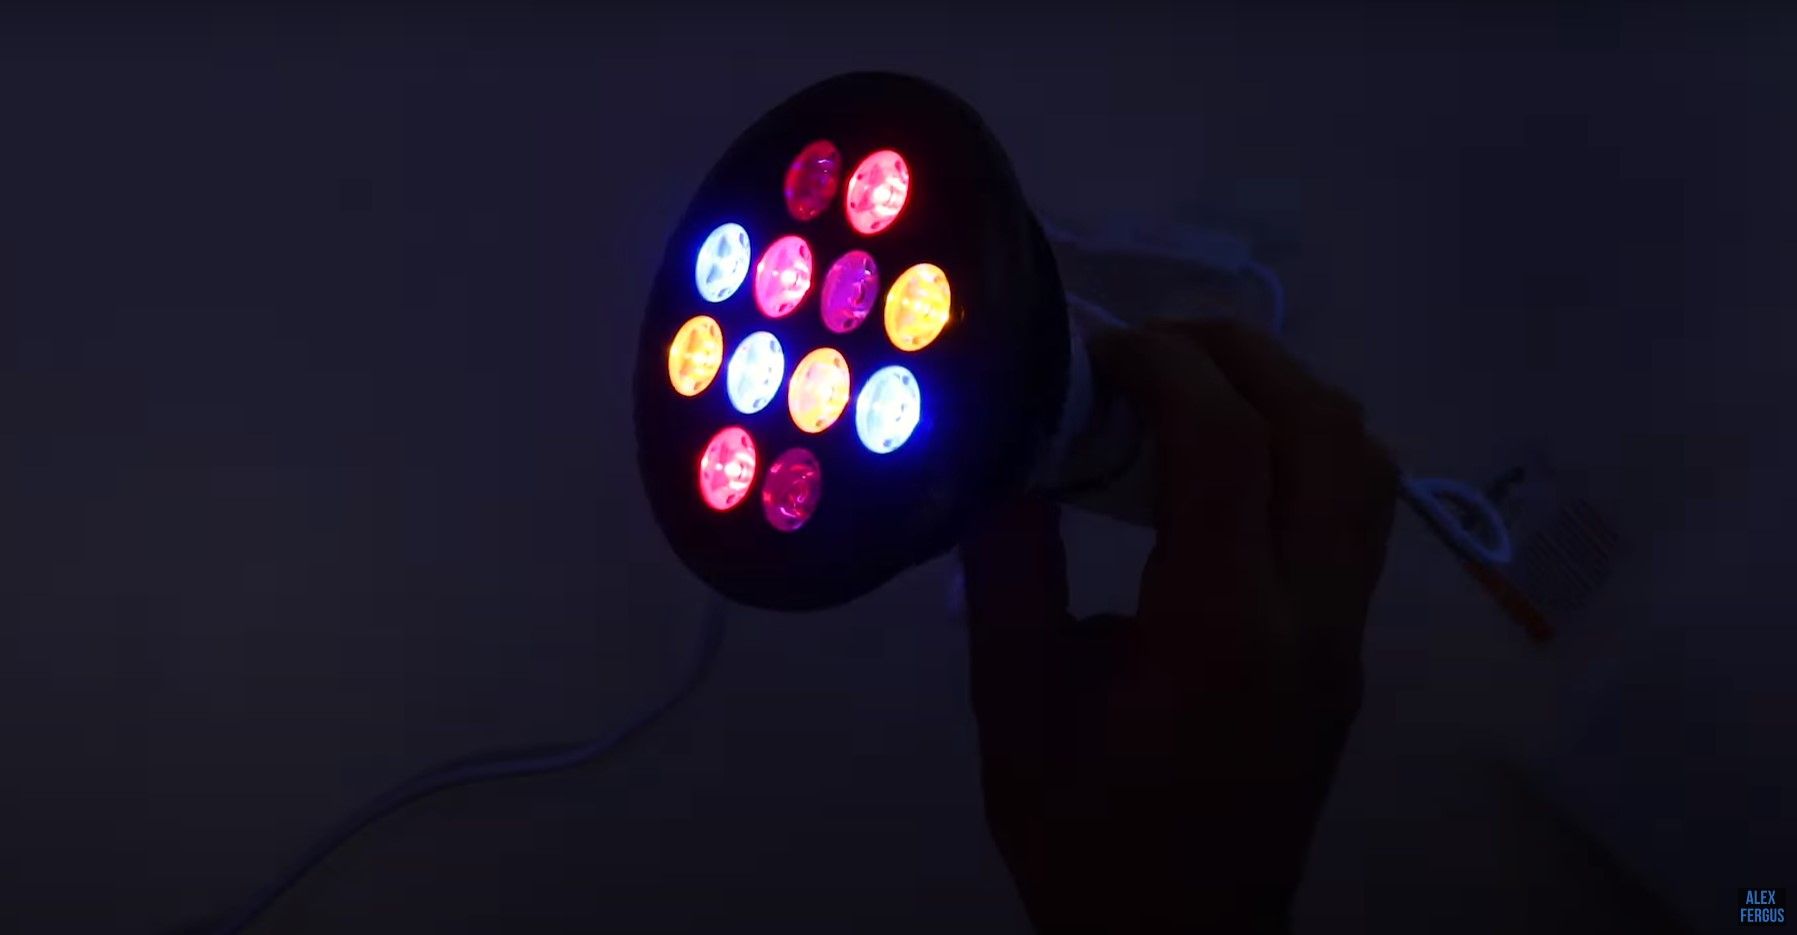 Handheld light therapy device glowing with multiple wavelengths